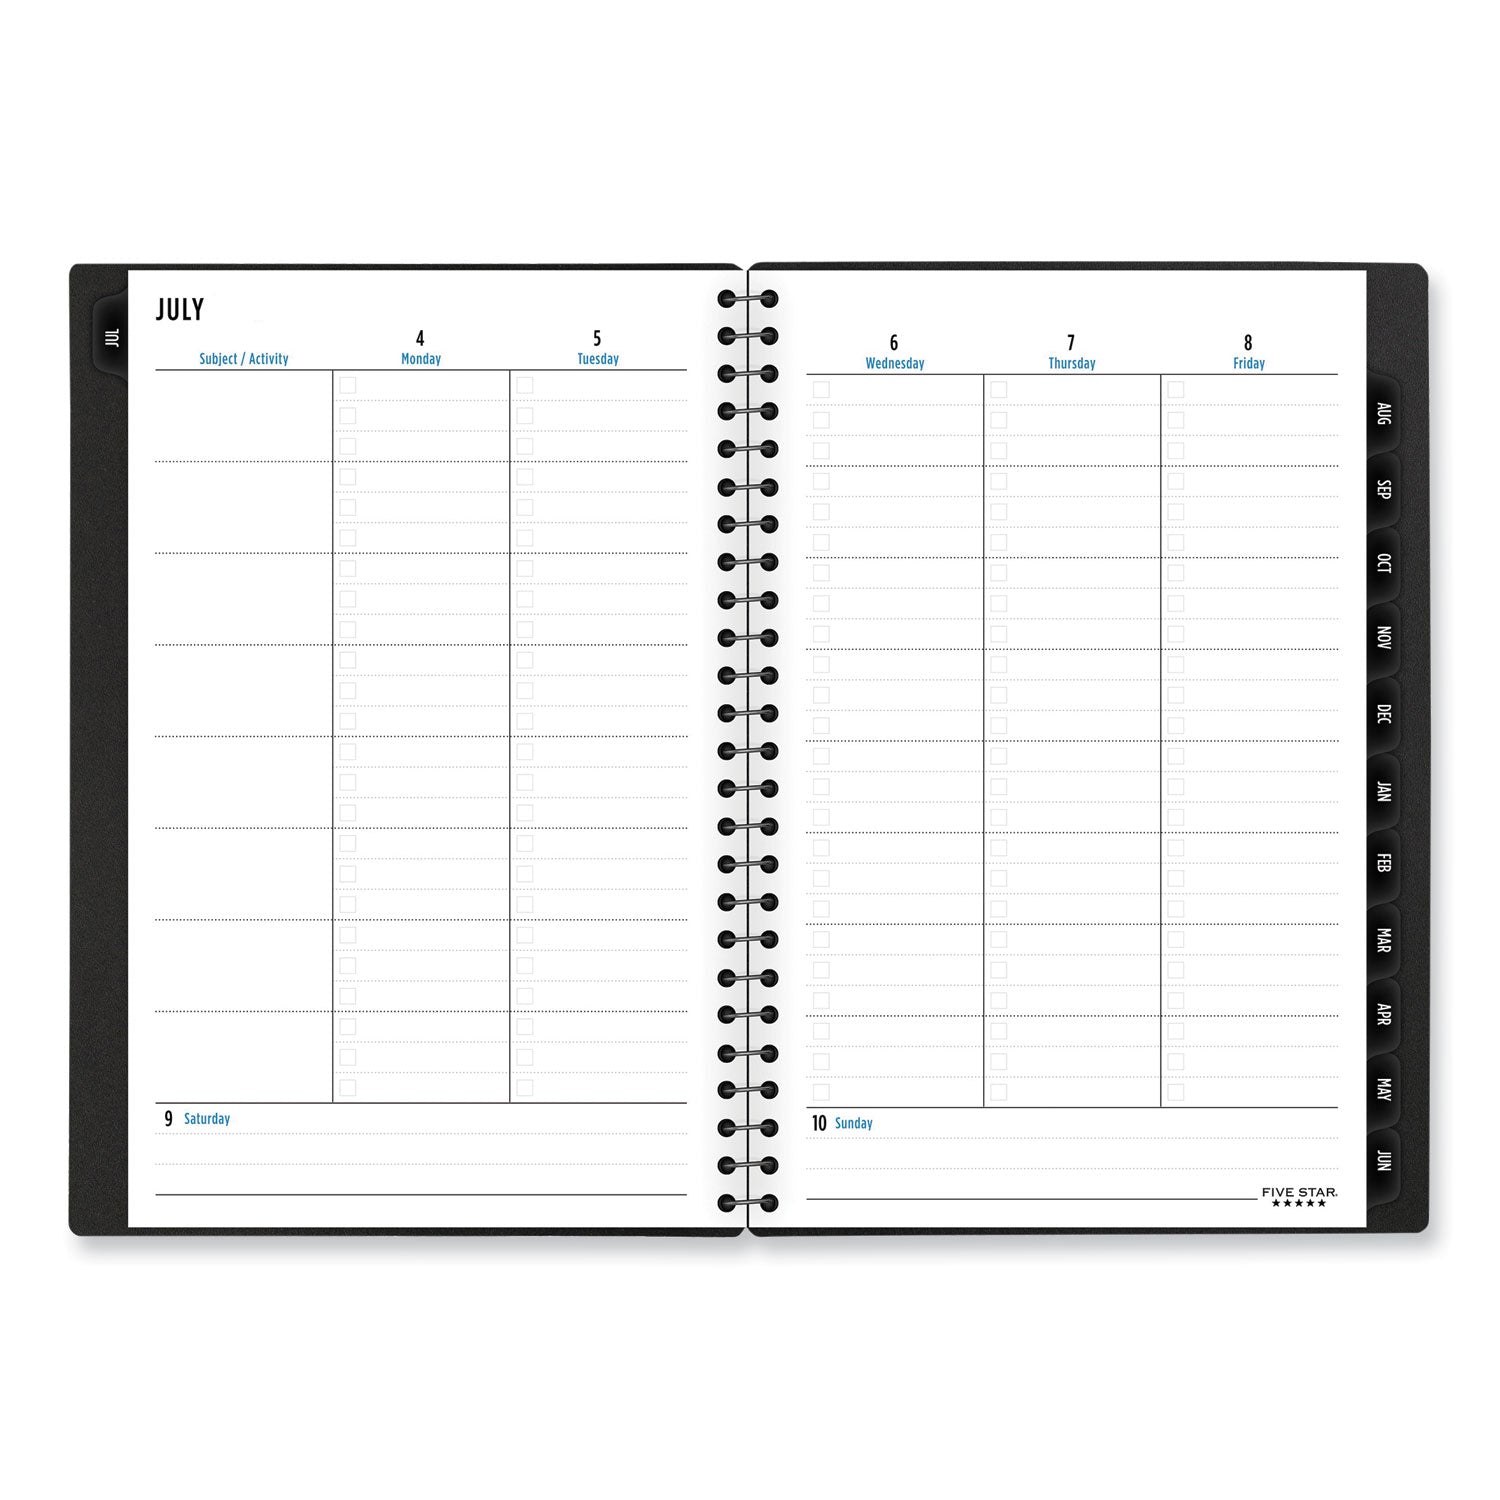 academic-year-weekly-monthly-planner-85-x-55-randomly-assorted-cover-colors-12-month-july-to-june-2022-to-2023_meacaw4510023 - 5